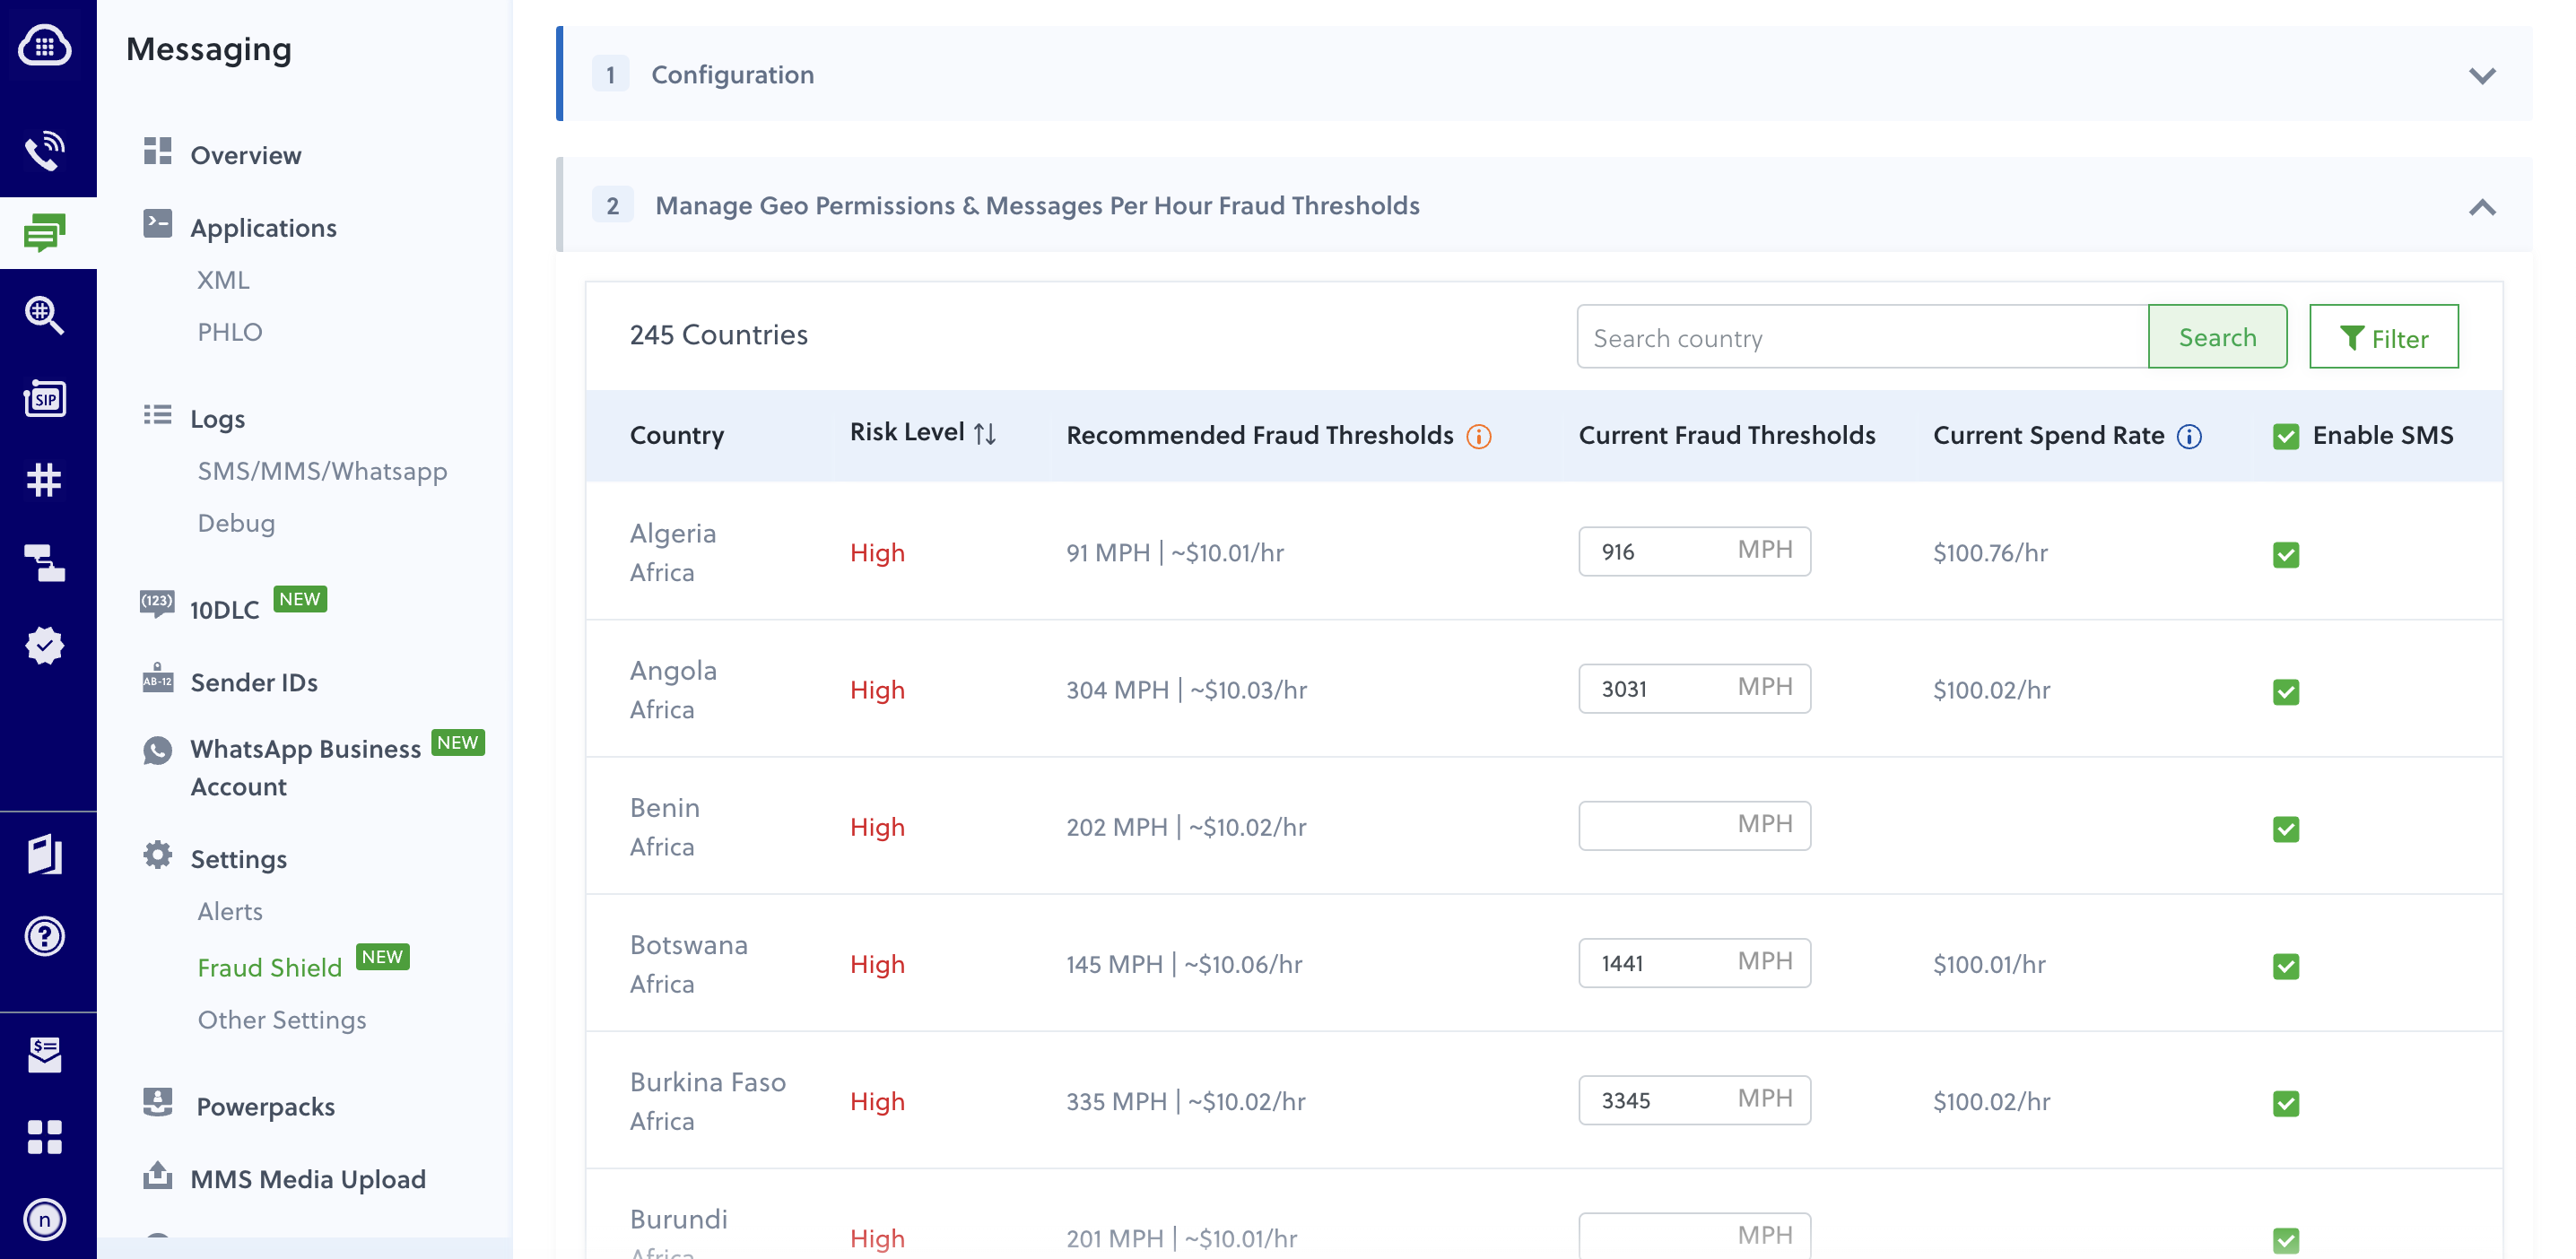 Manage Geo Permissions and messages per hour fraud thresholds